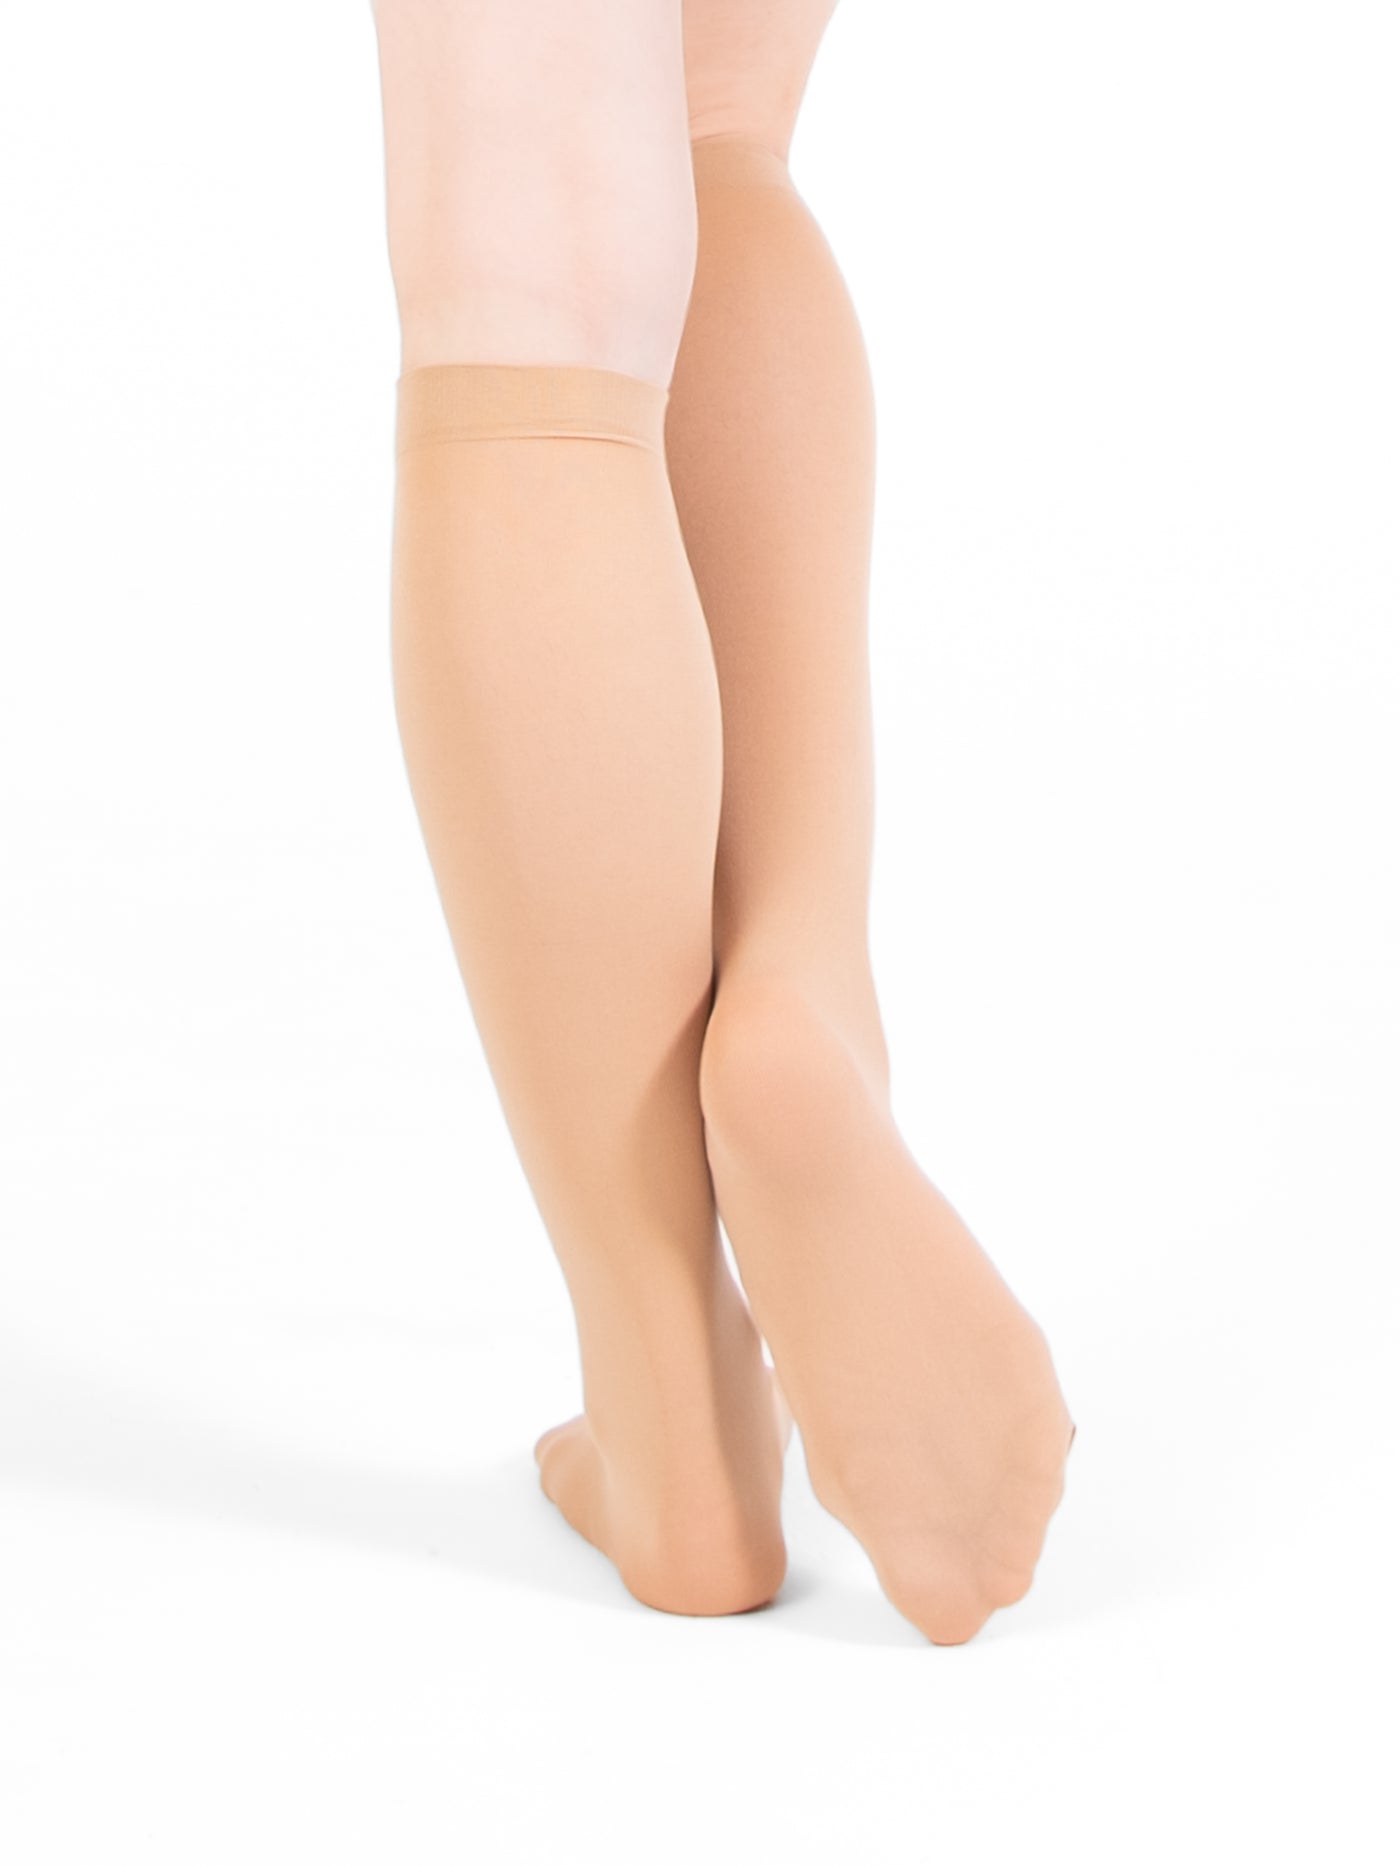 TotalSTRETCH Knee High Tights